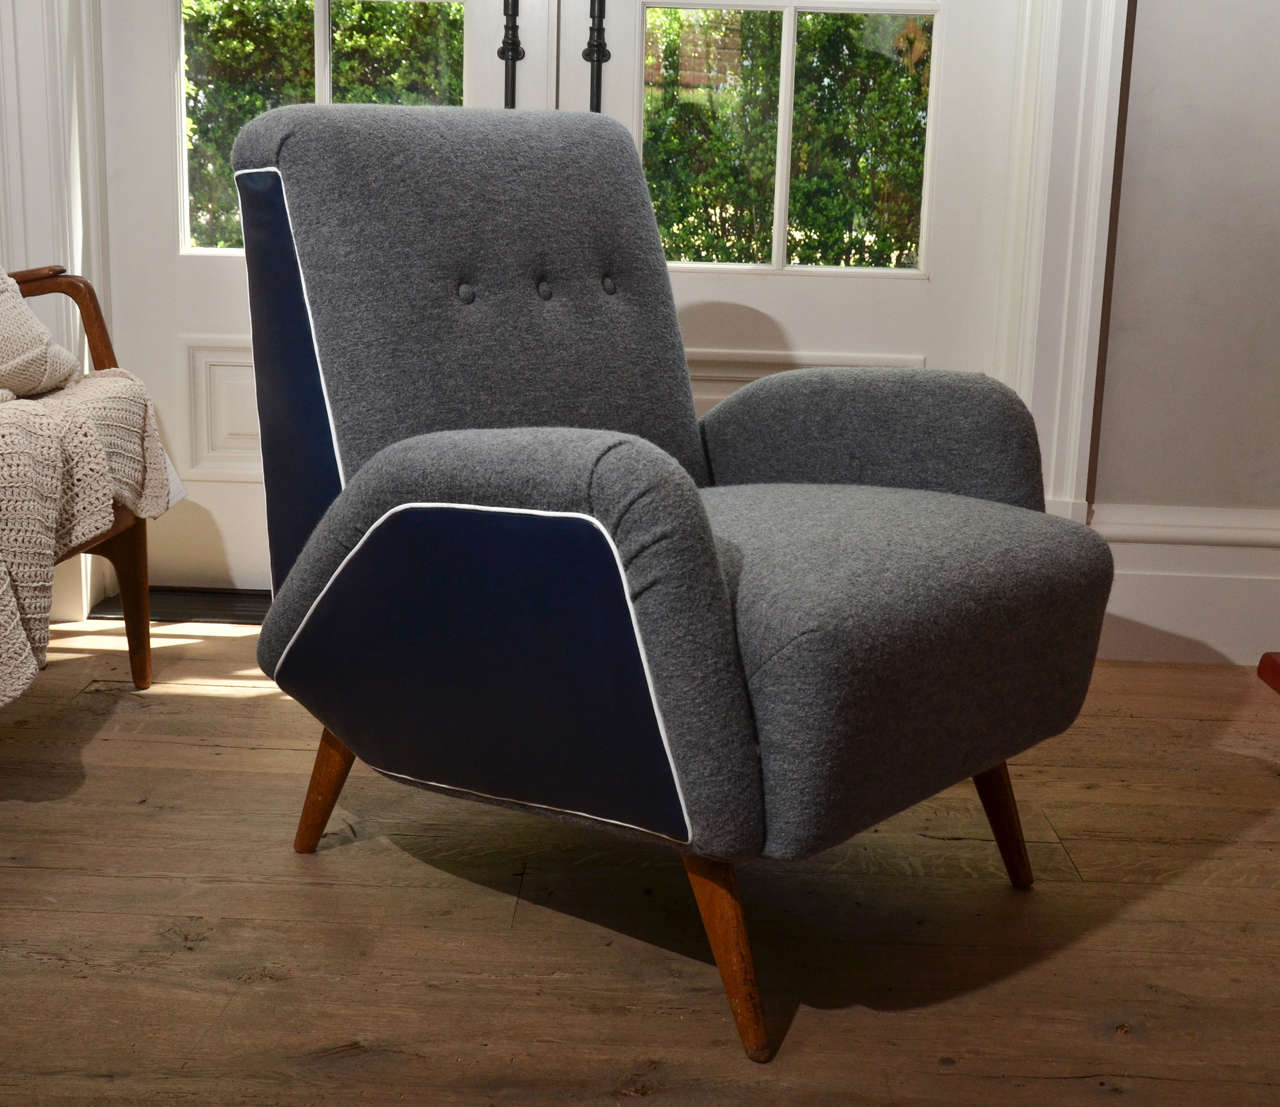 Stunning midcentury Italian armchairs newly re-upholstered in boiled wool with navy leather and white leather piping.